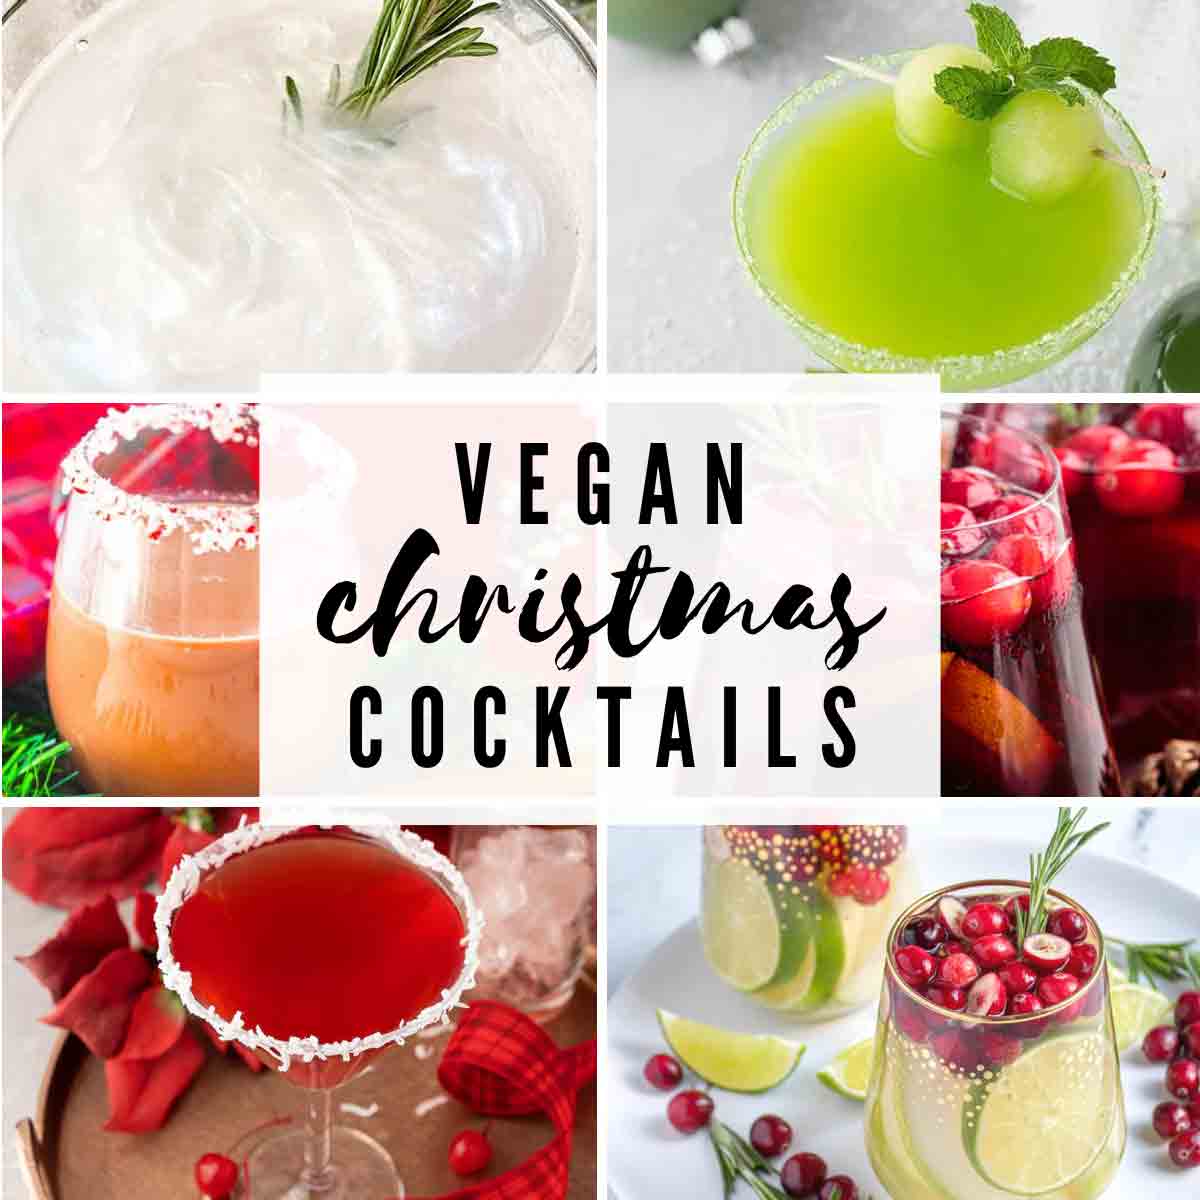 Image Collage Of Vegan Christmas Cocktails With Text Overlay